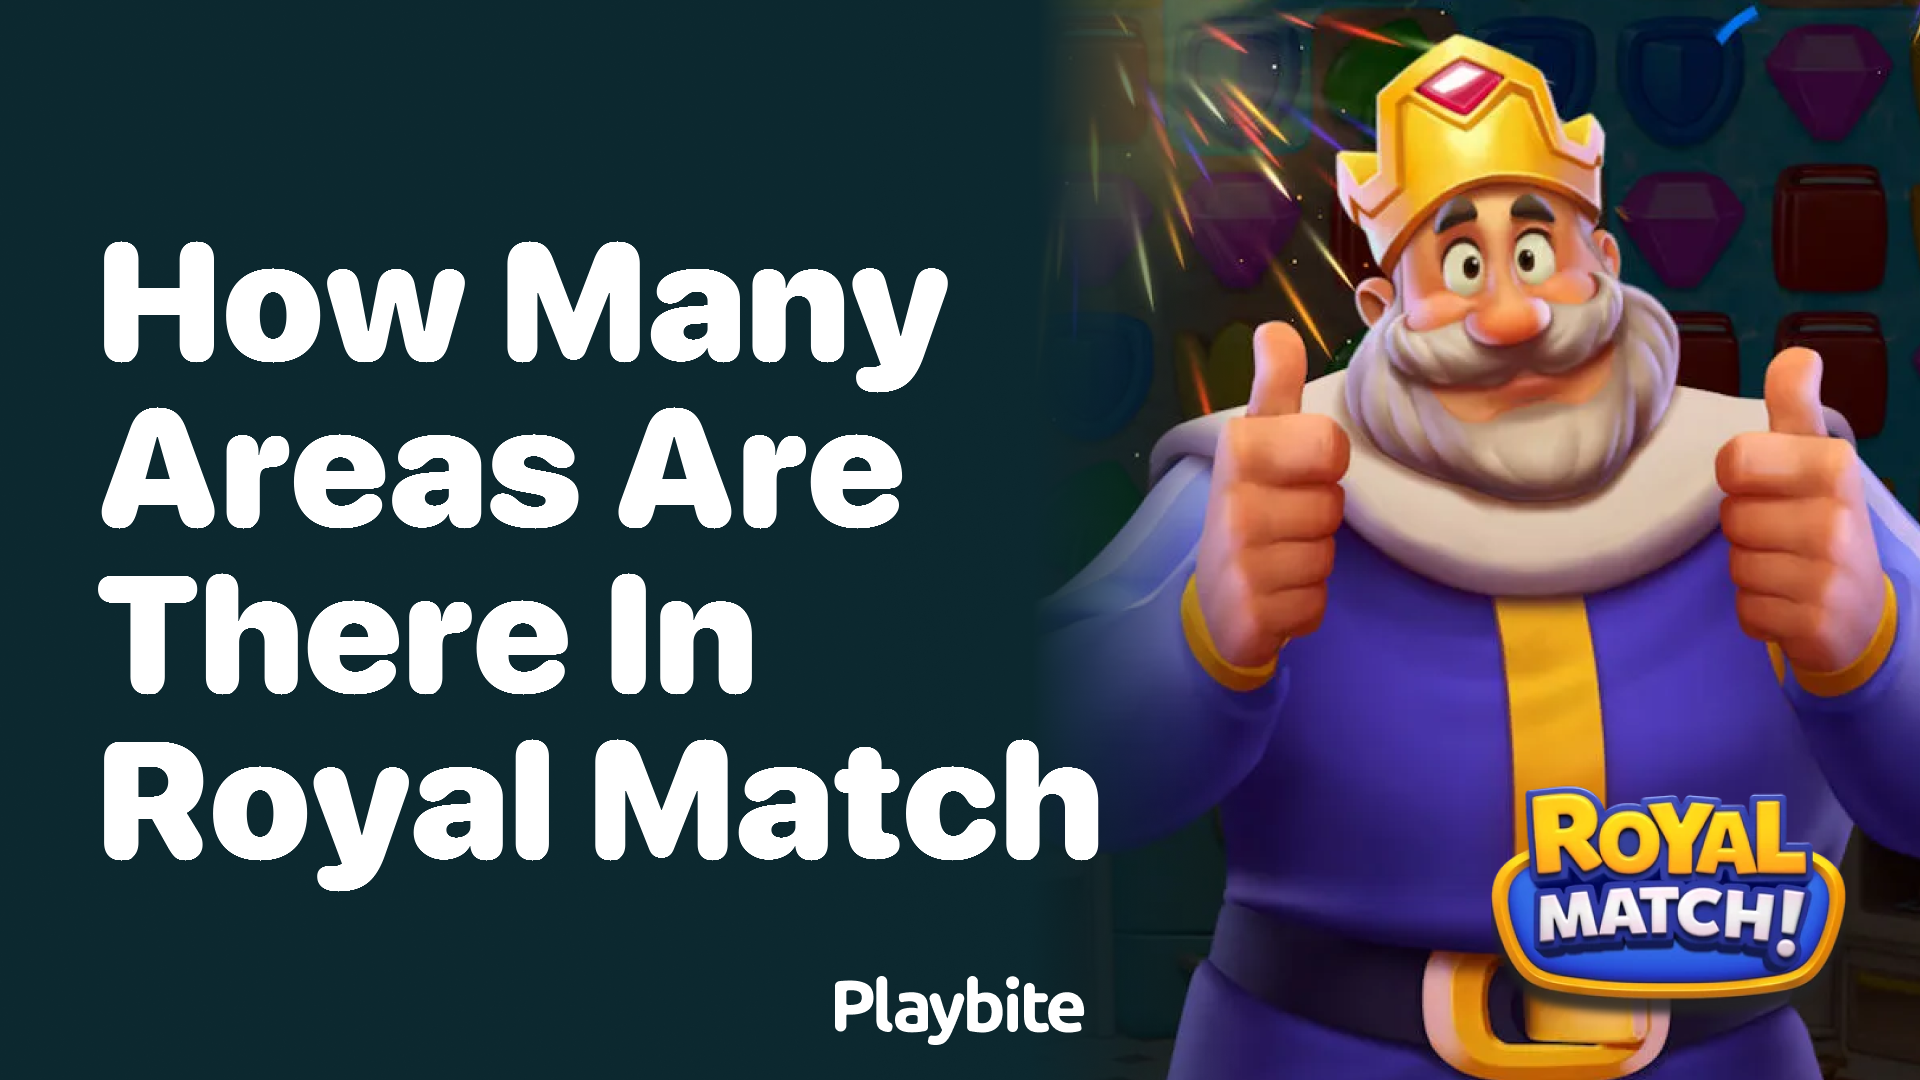 How Many Areas Are There in Royal Match?